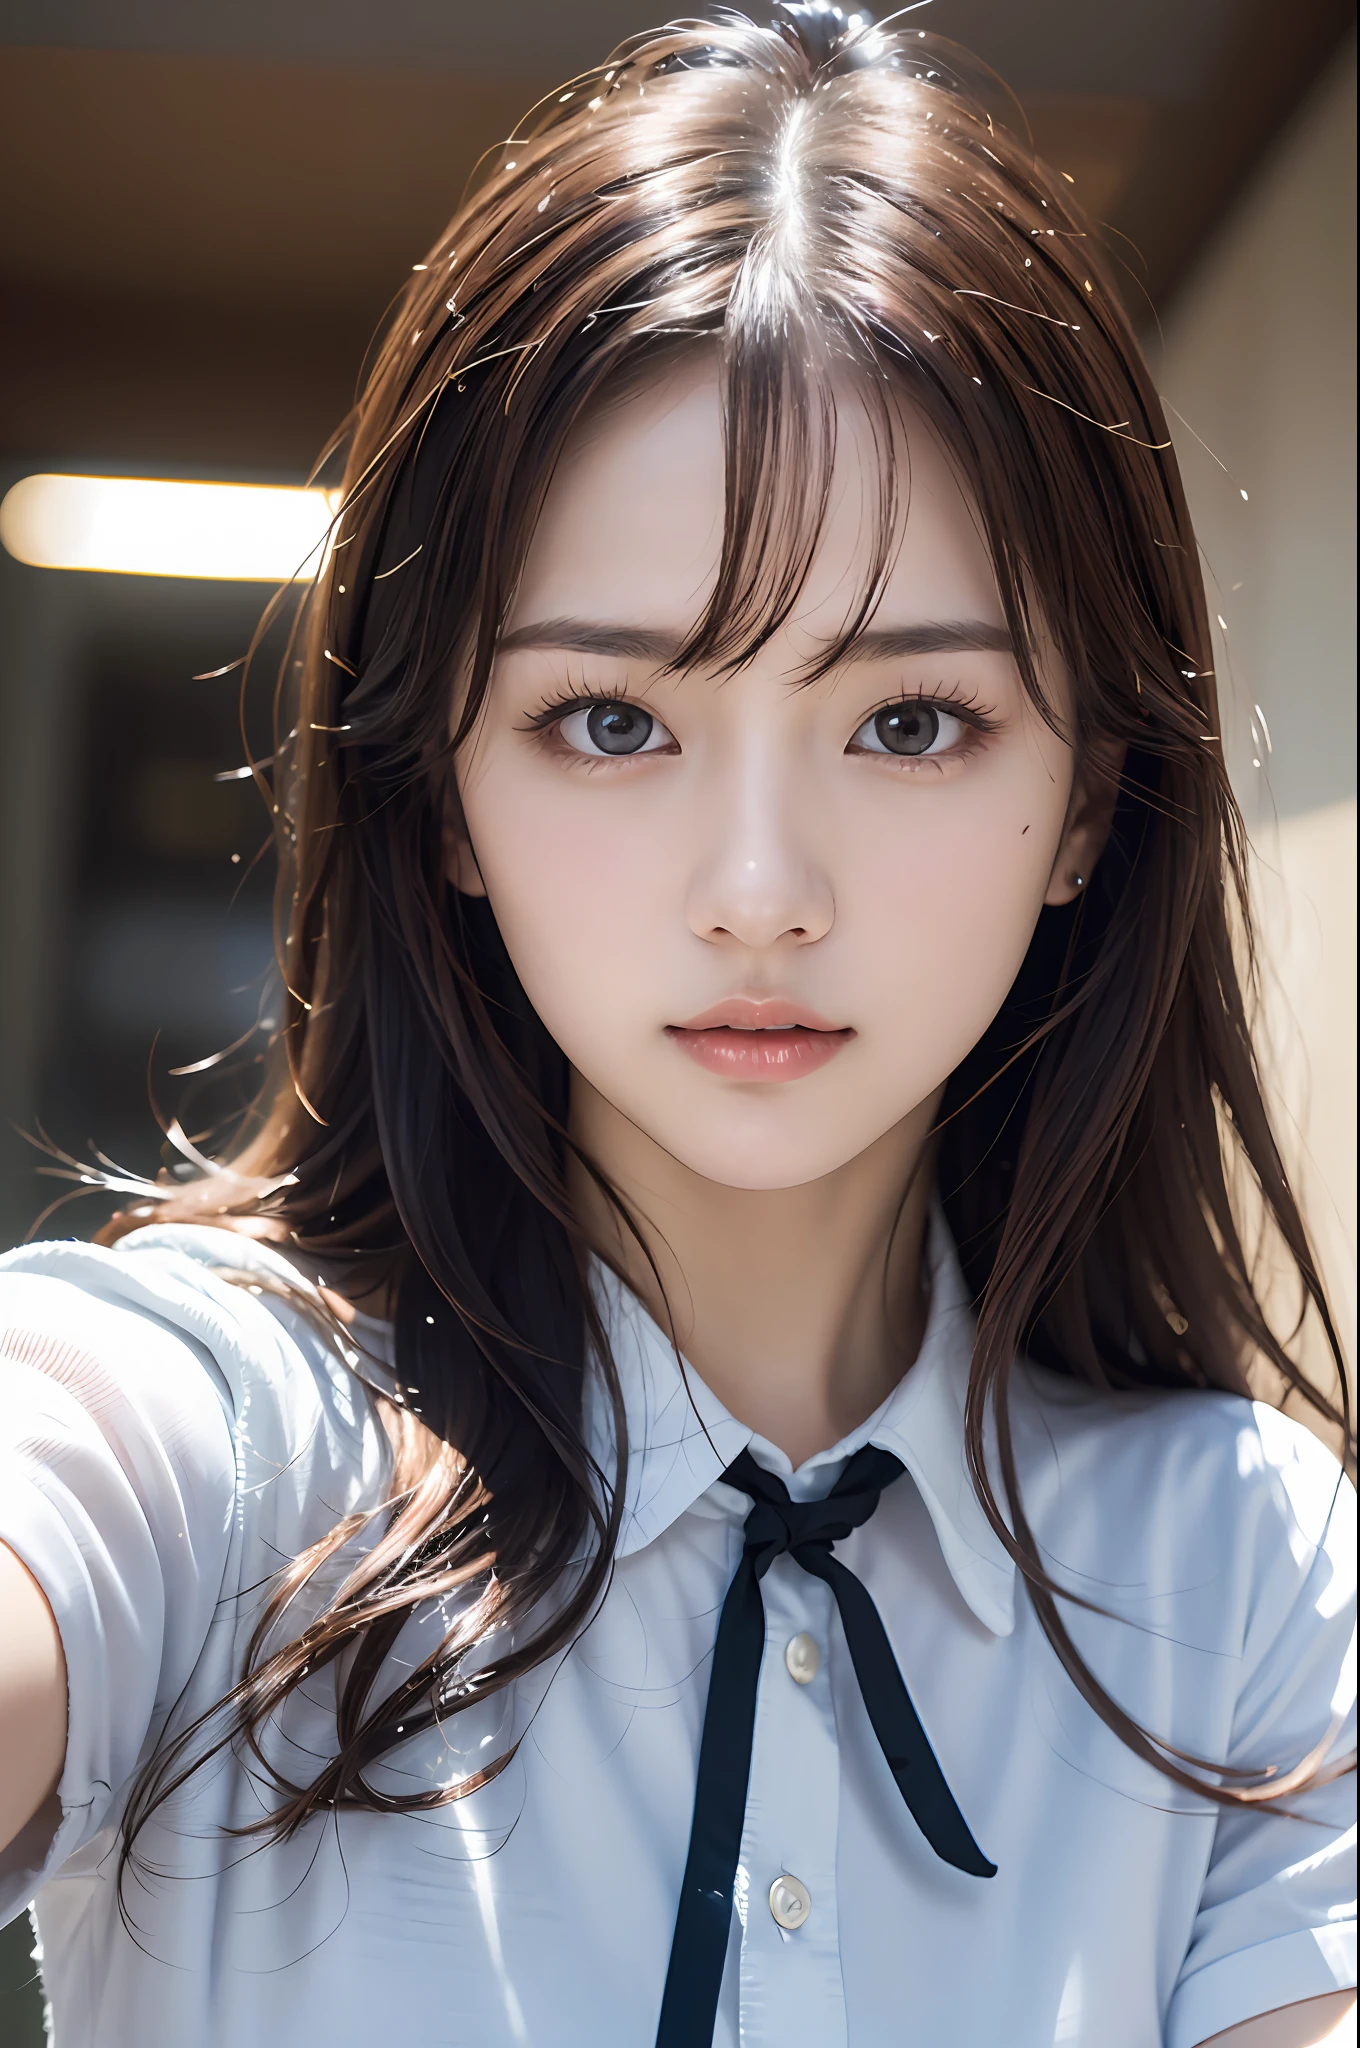 clothed、(photo real:1.4)、(Hyperrealistic:1.4)、(Realstic:1.3)、
(Smoother lighting:1.05)、(improved movie lighting quality:0.9)、32 k、
1GIRL、20 years old girl、Realistic Lighting、Backlit、Facial light、Ray Trace、(Brightening light:1.2)、(Increase quality:1.4)、
(Top Quality Real Texture Skin)、Fine eyes、finerly detailed face、
(Tired, sleepy and satisfied:0.0)、closeup on face、Student uniform:1.3、korean idol、Nogizaka Idol、hposing Gravure Idol
(Bodyline mood improvement:1.1)、Glossy skin、korean idol、Nogizaka Idol、hposing Gravure Idol、anus　selfie